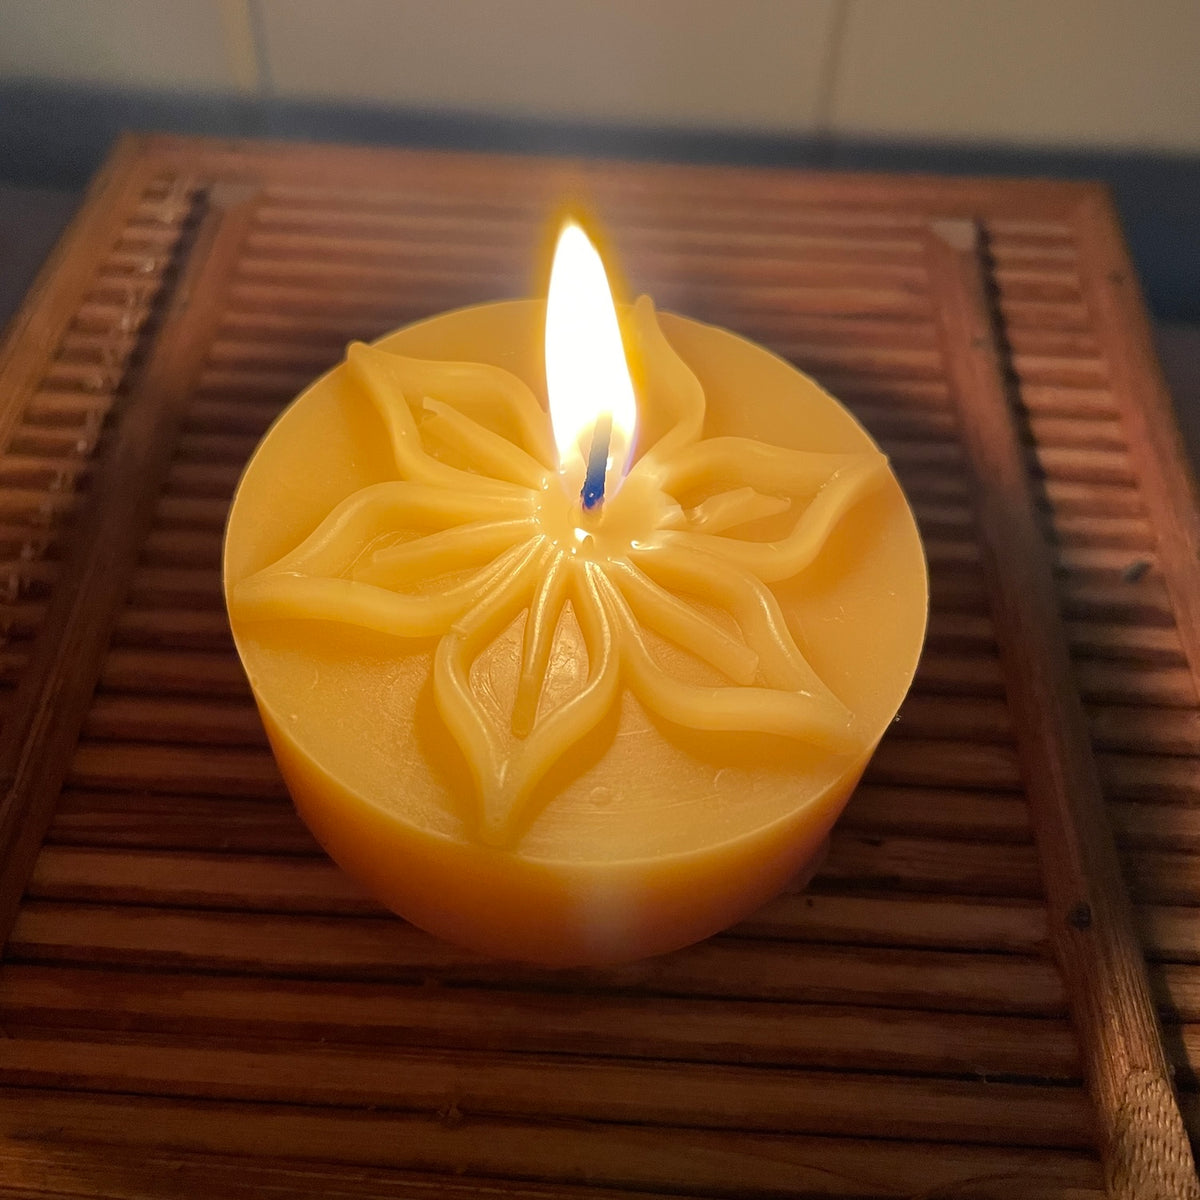 Beeswax star meditation candle from Happy Flame